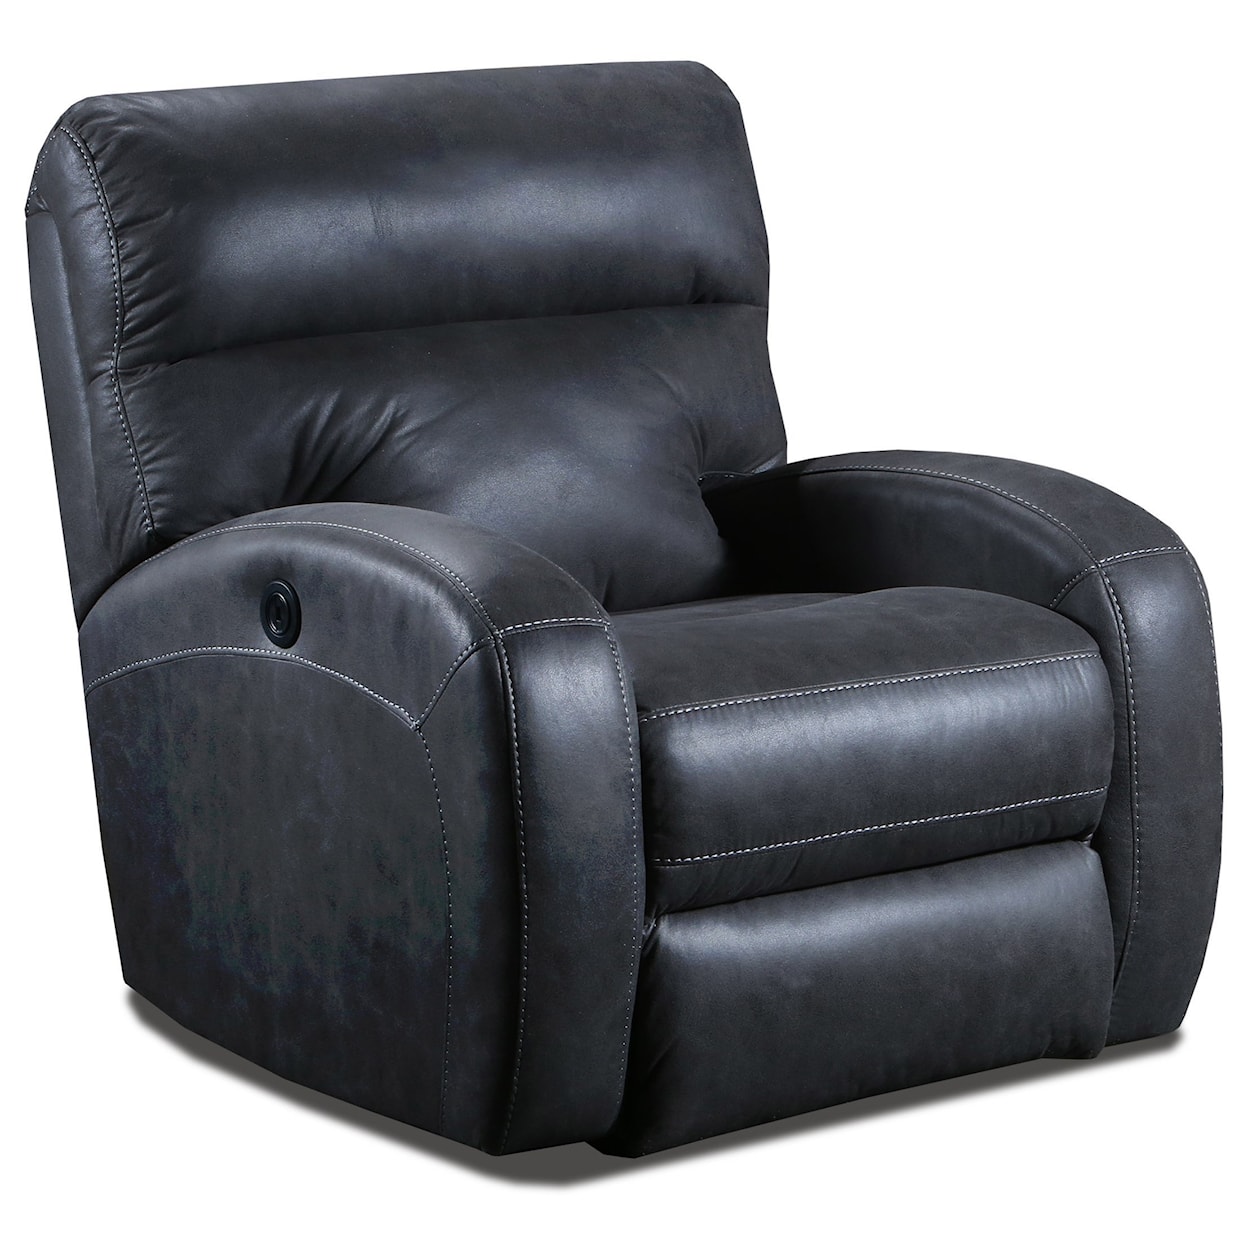 Southern Motion Colby Power Swivel Glider Recliner